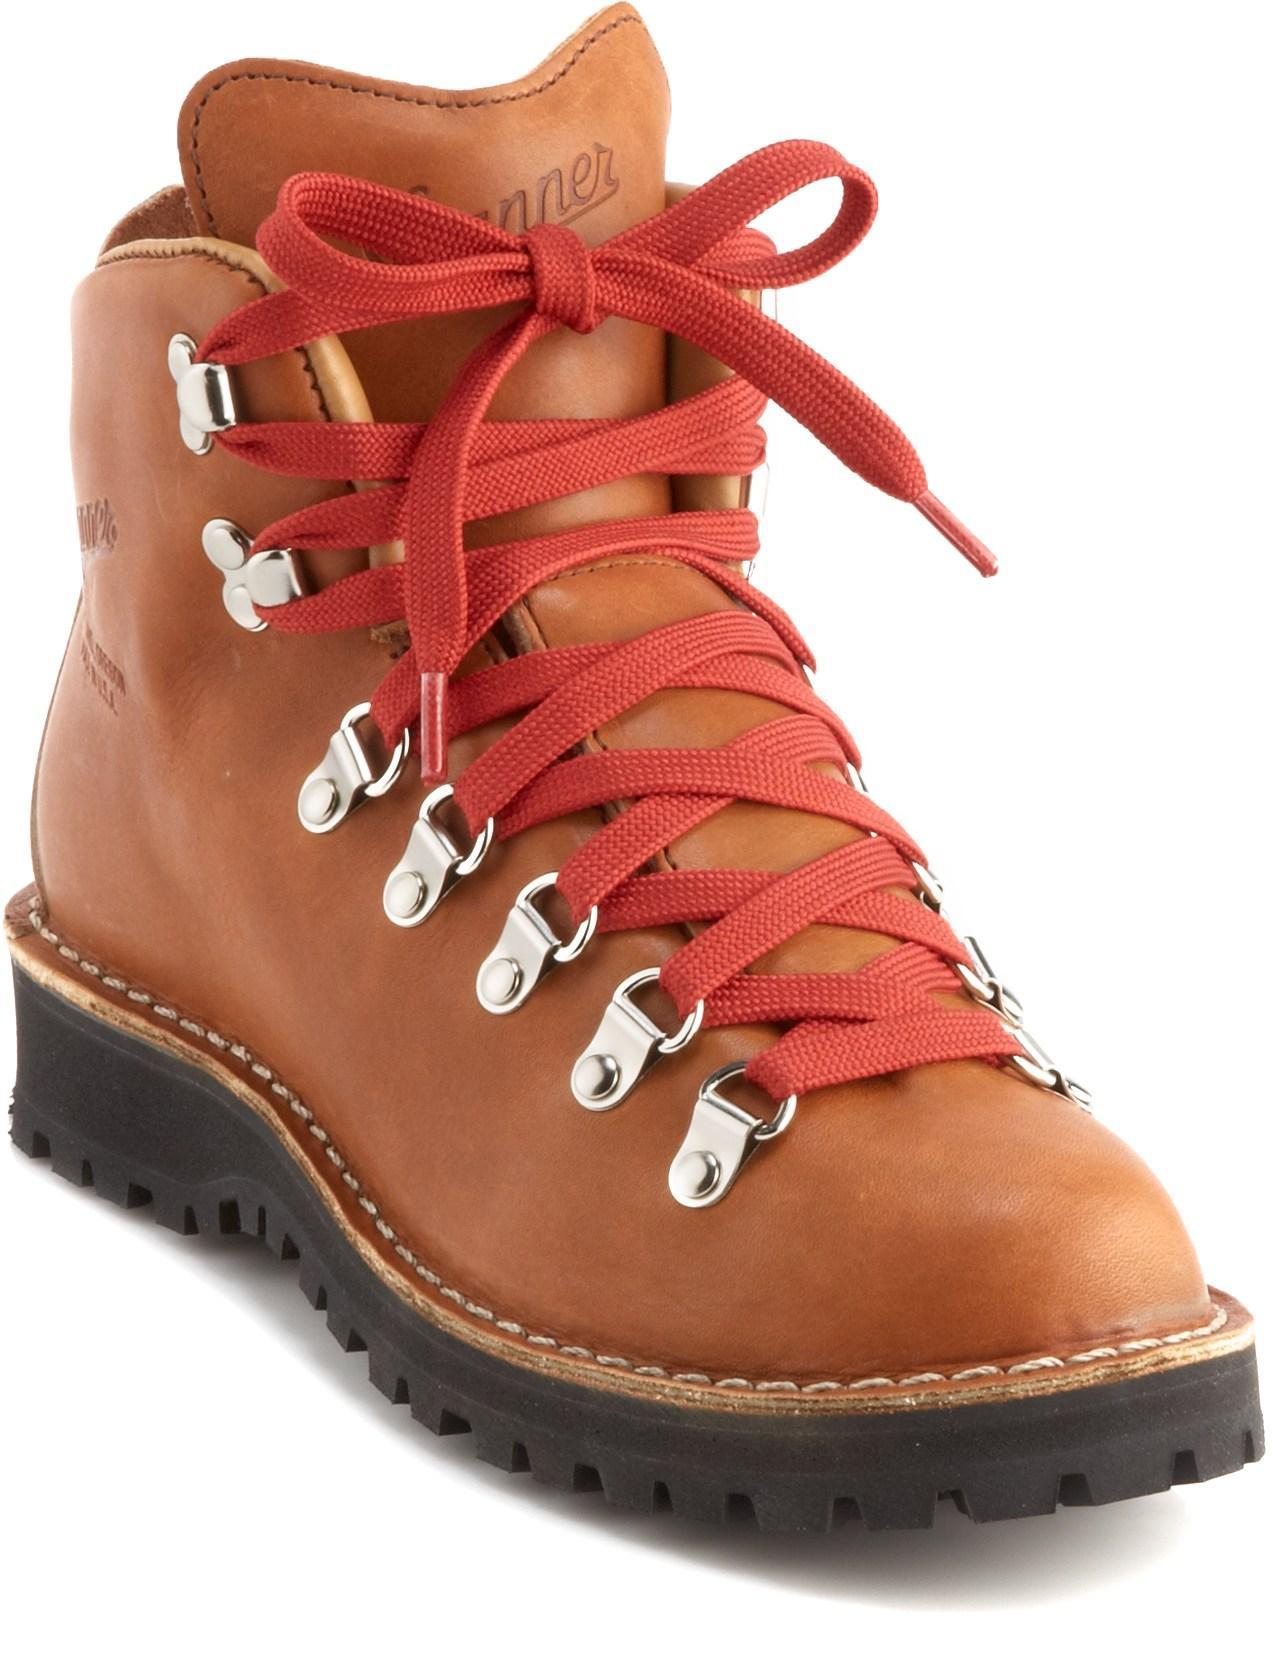 10 of the Funkiest Hiking Boots for Women